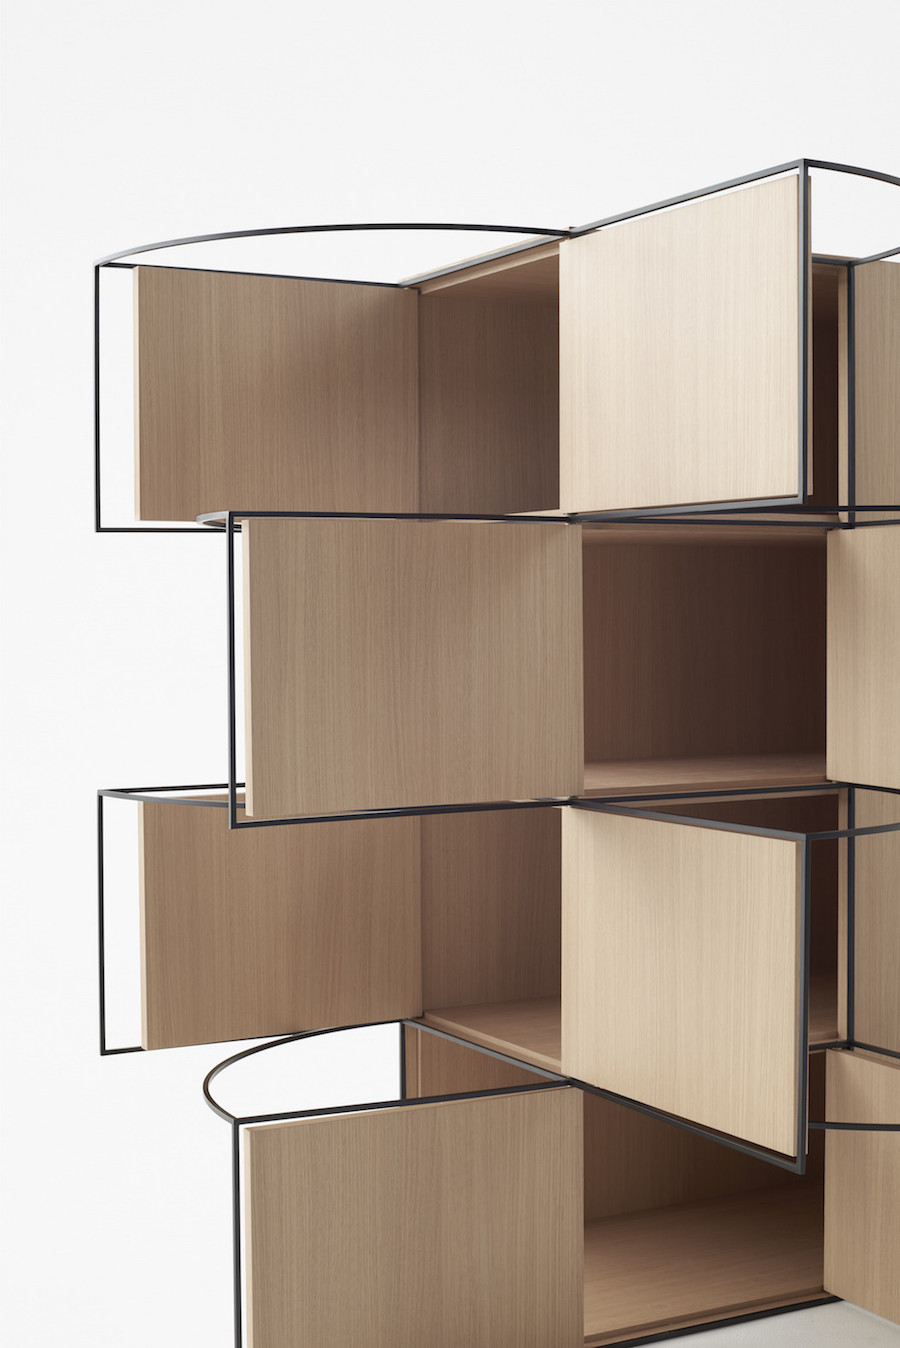 Nice and Useful Moving Furniture by Nendo11